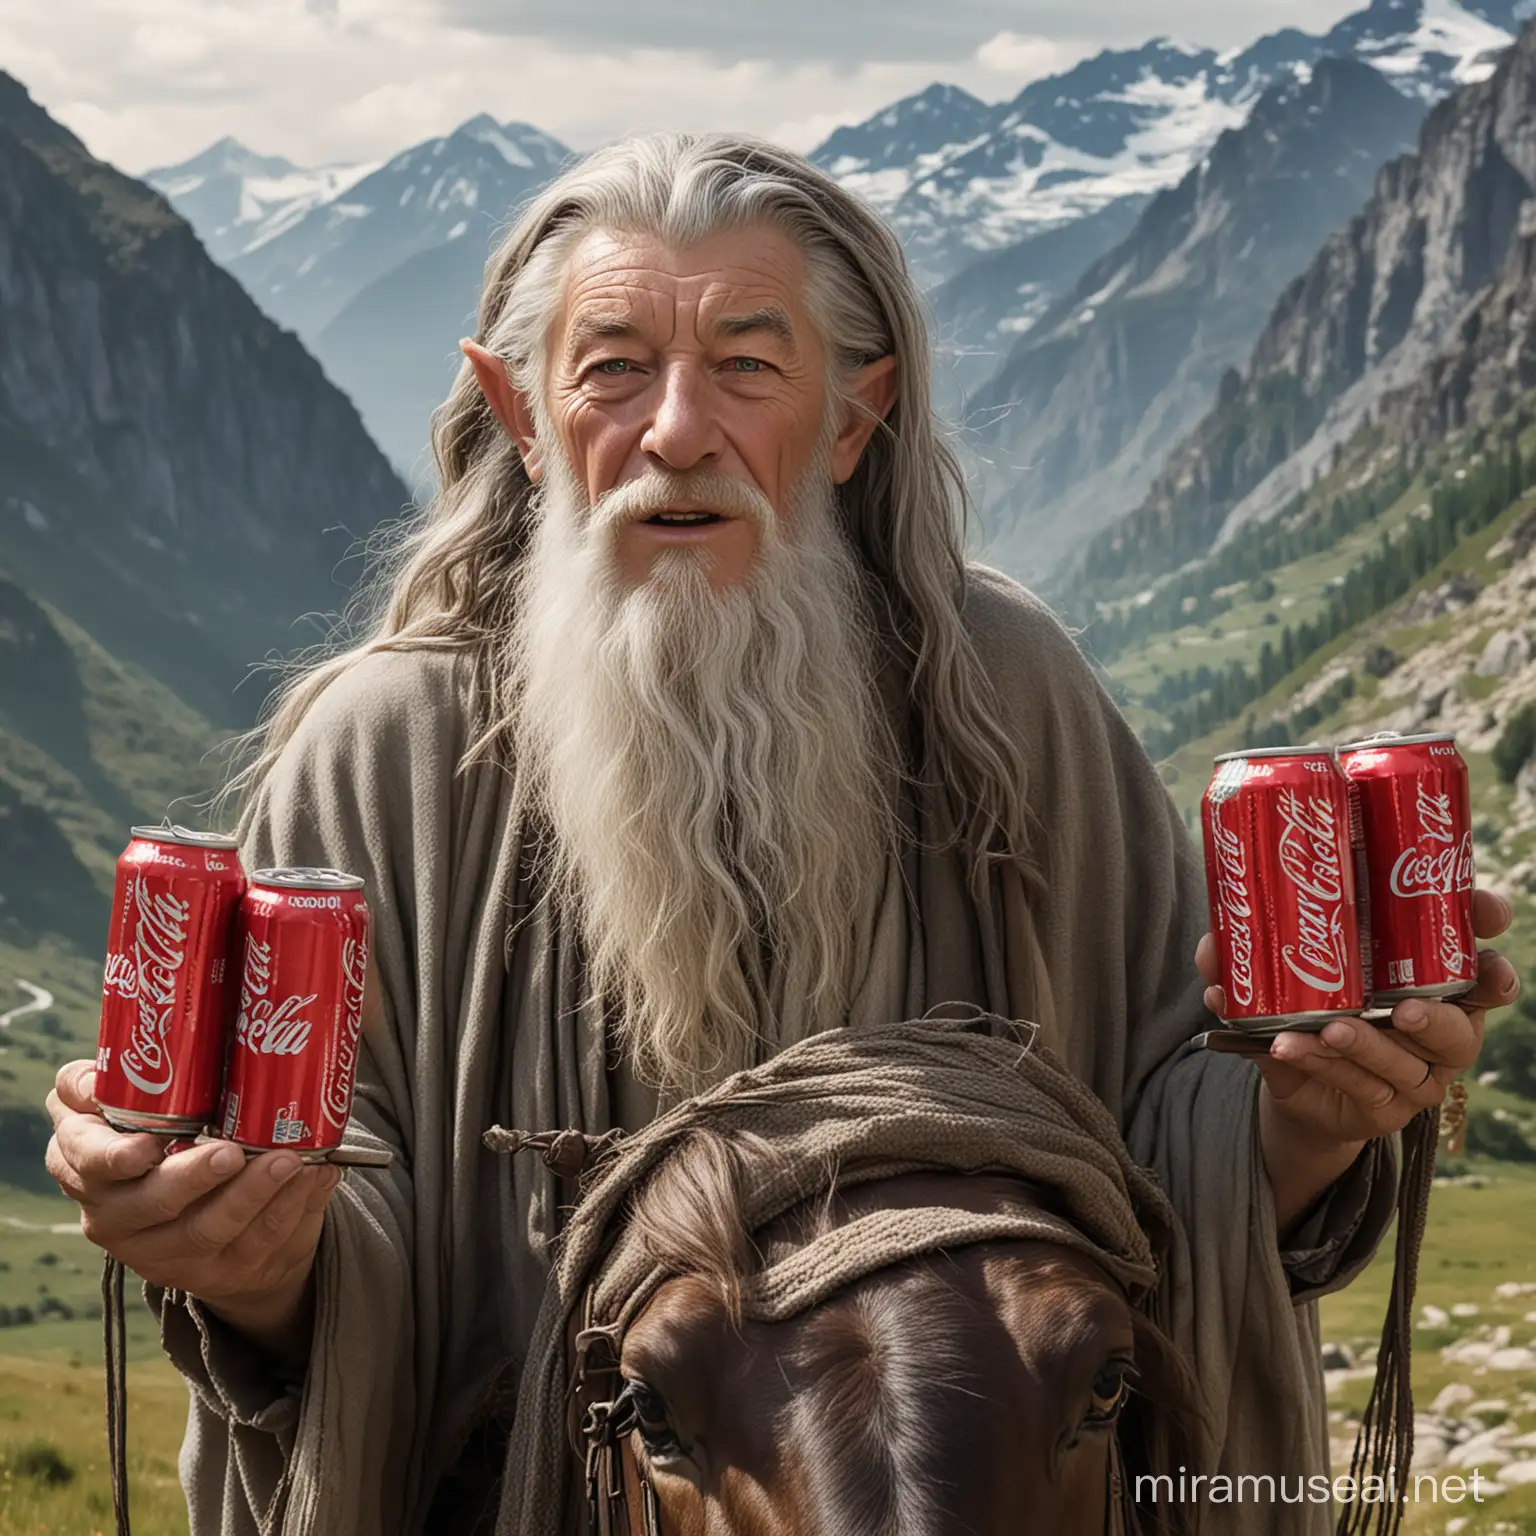 Gandalf Riding Chariot Through Mountain Landscape with Intense Expression